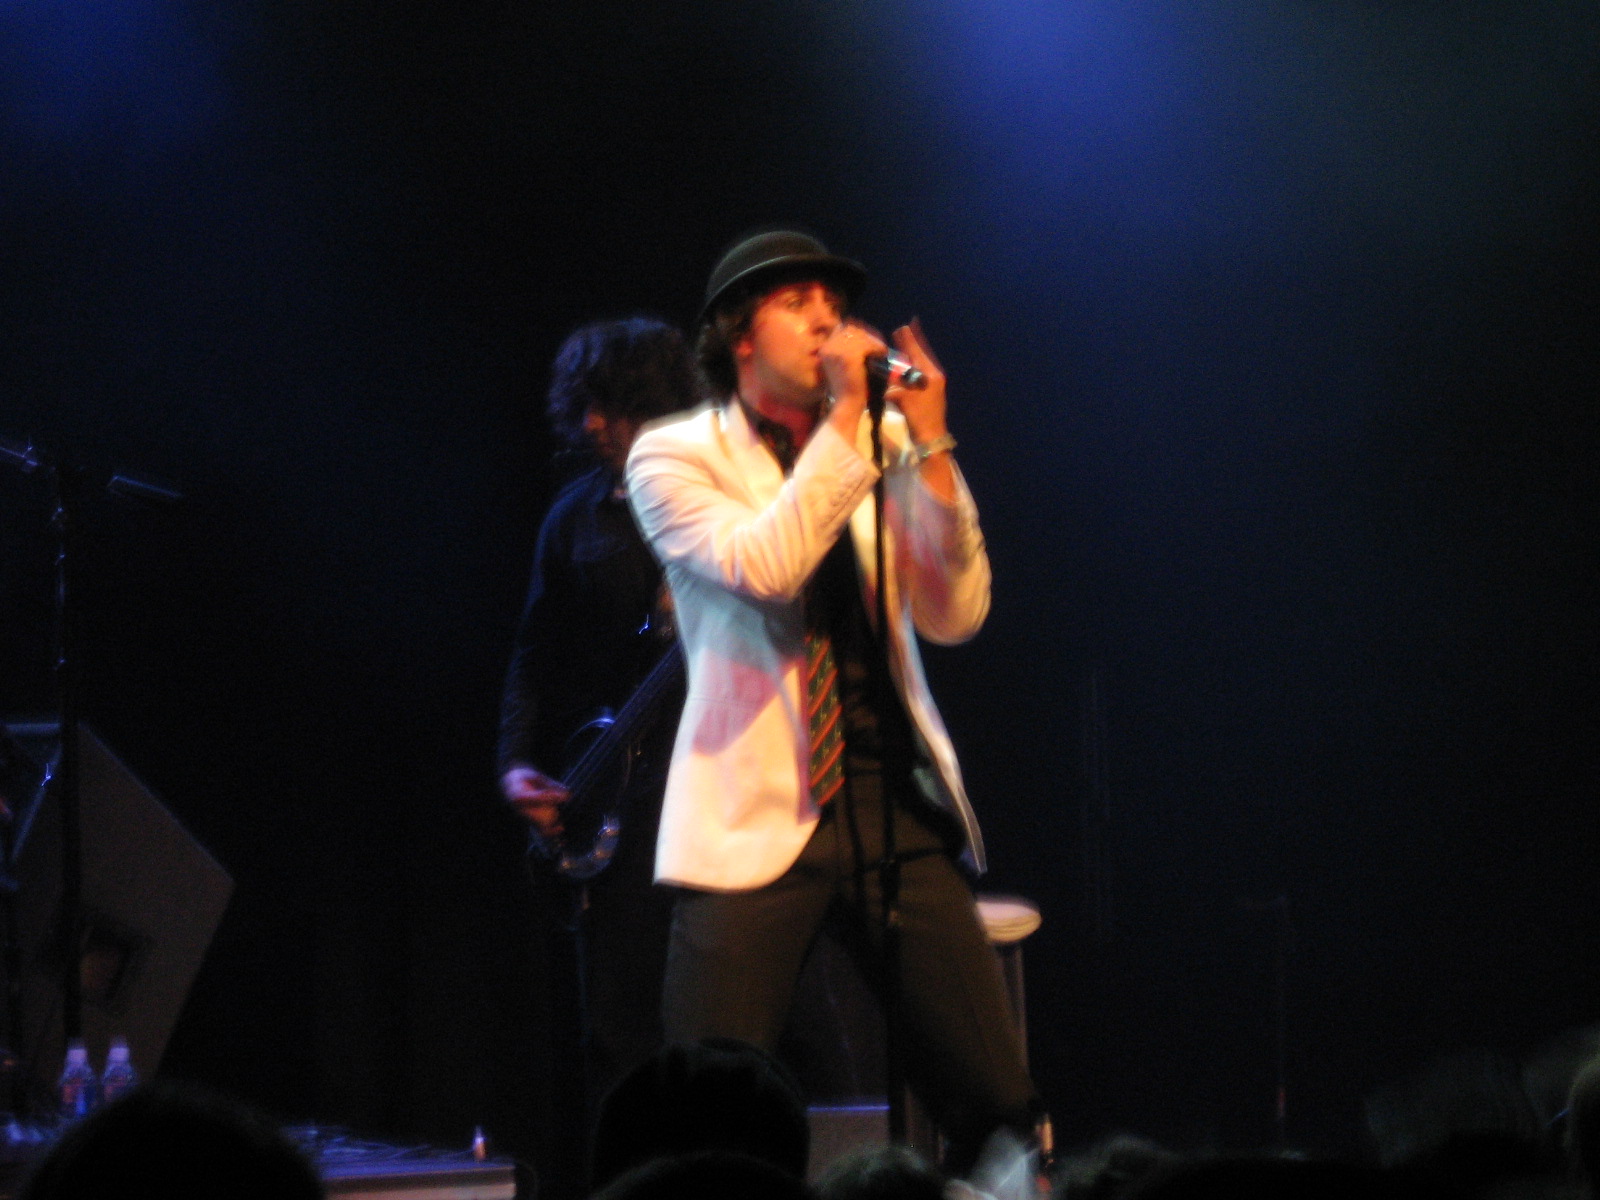 Maxïmo Park singer Paul Smith singing into a microphone at a concert